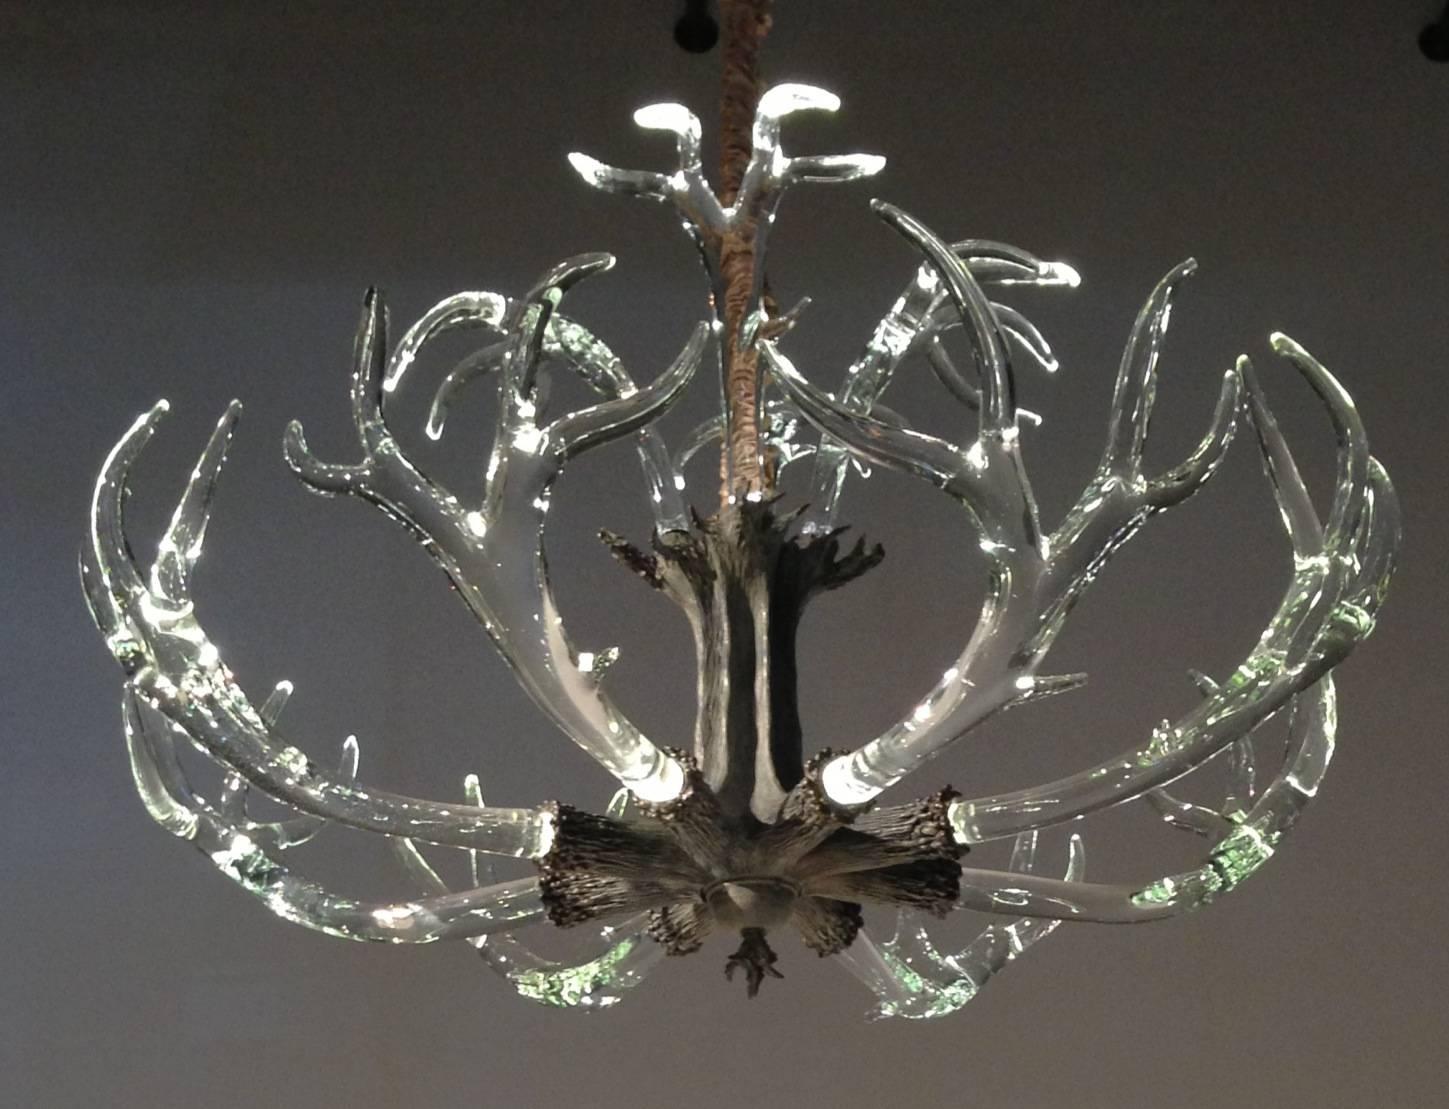 A very stylish interpretation of the traditional antler chandelier with a bronze center mount and solid hand-sculpted crystal antlers, by artist Jason Lawson.

The mount has LED lights within, which dramatically illuminate each antler.

Each